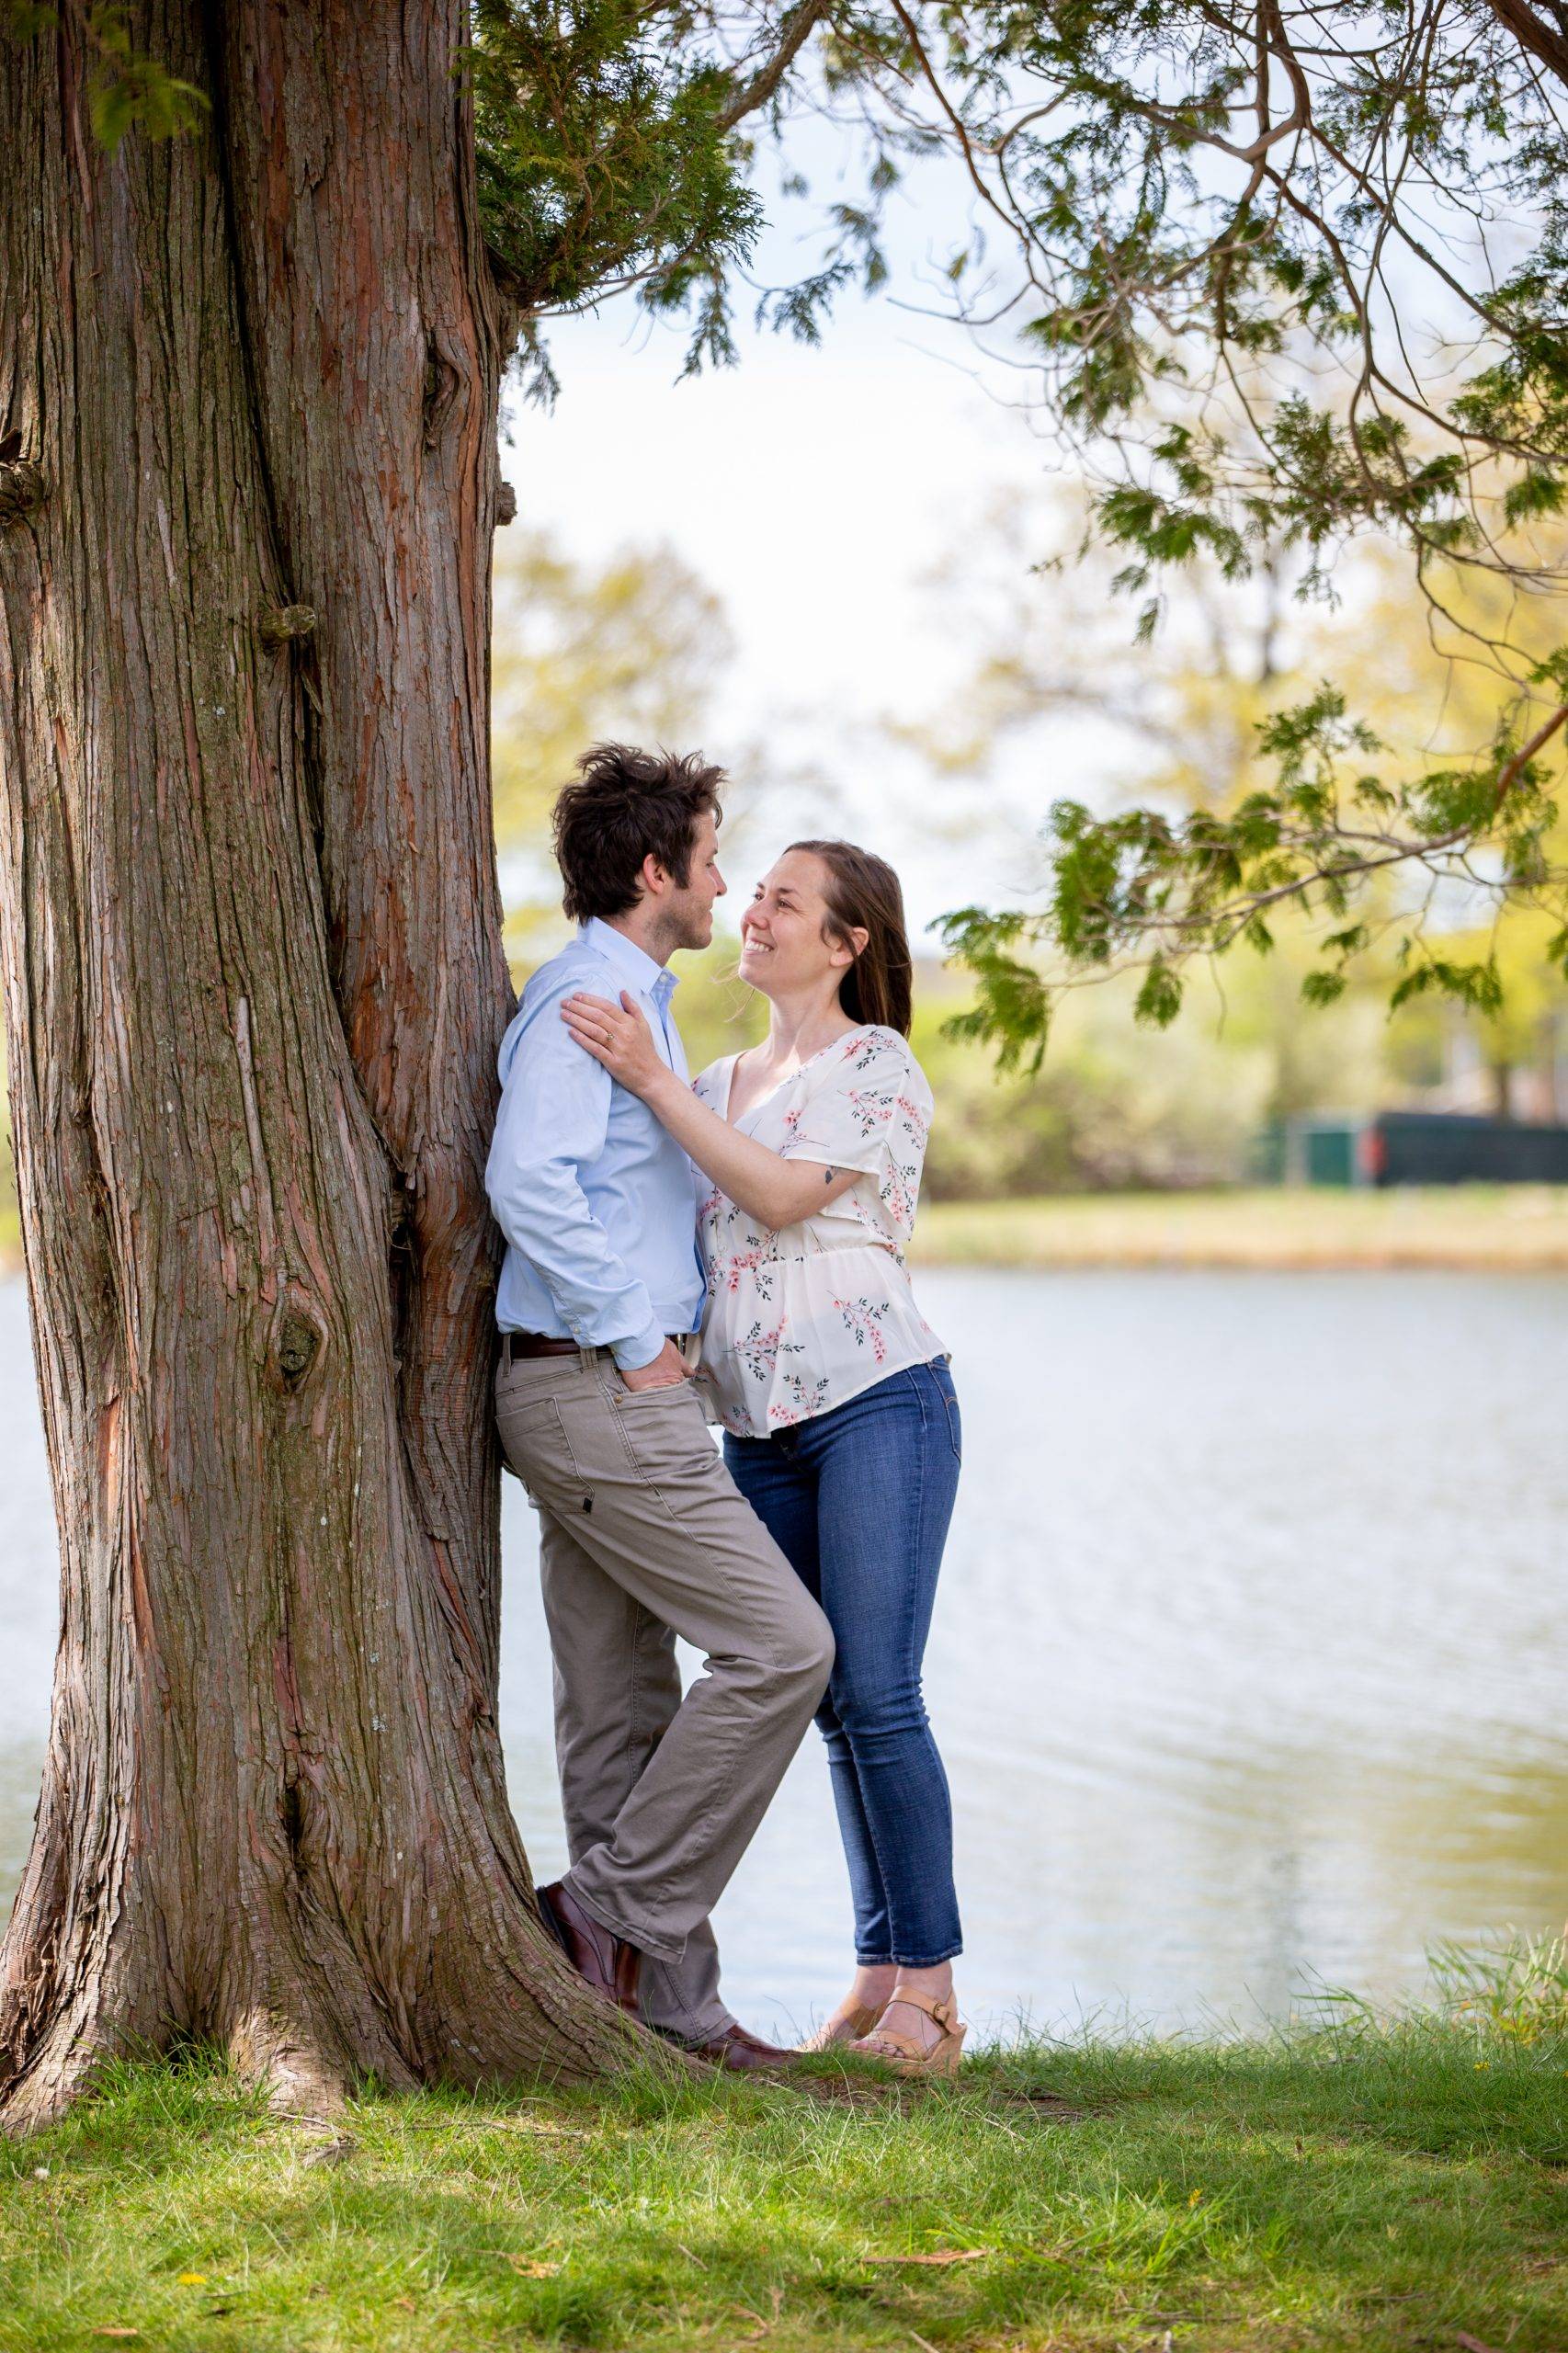 An engaged couple leaning against a tree near a lake.